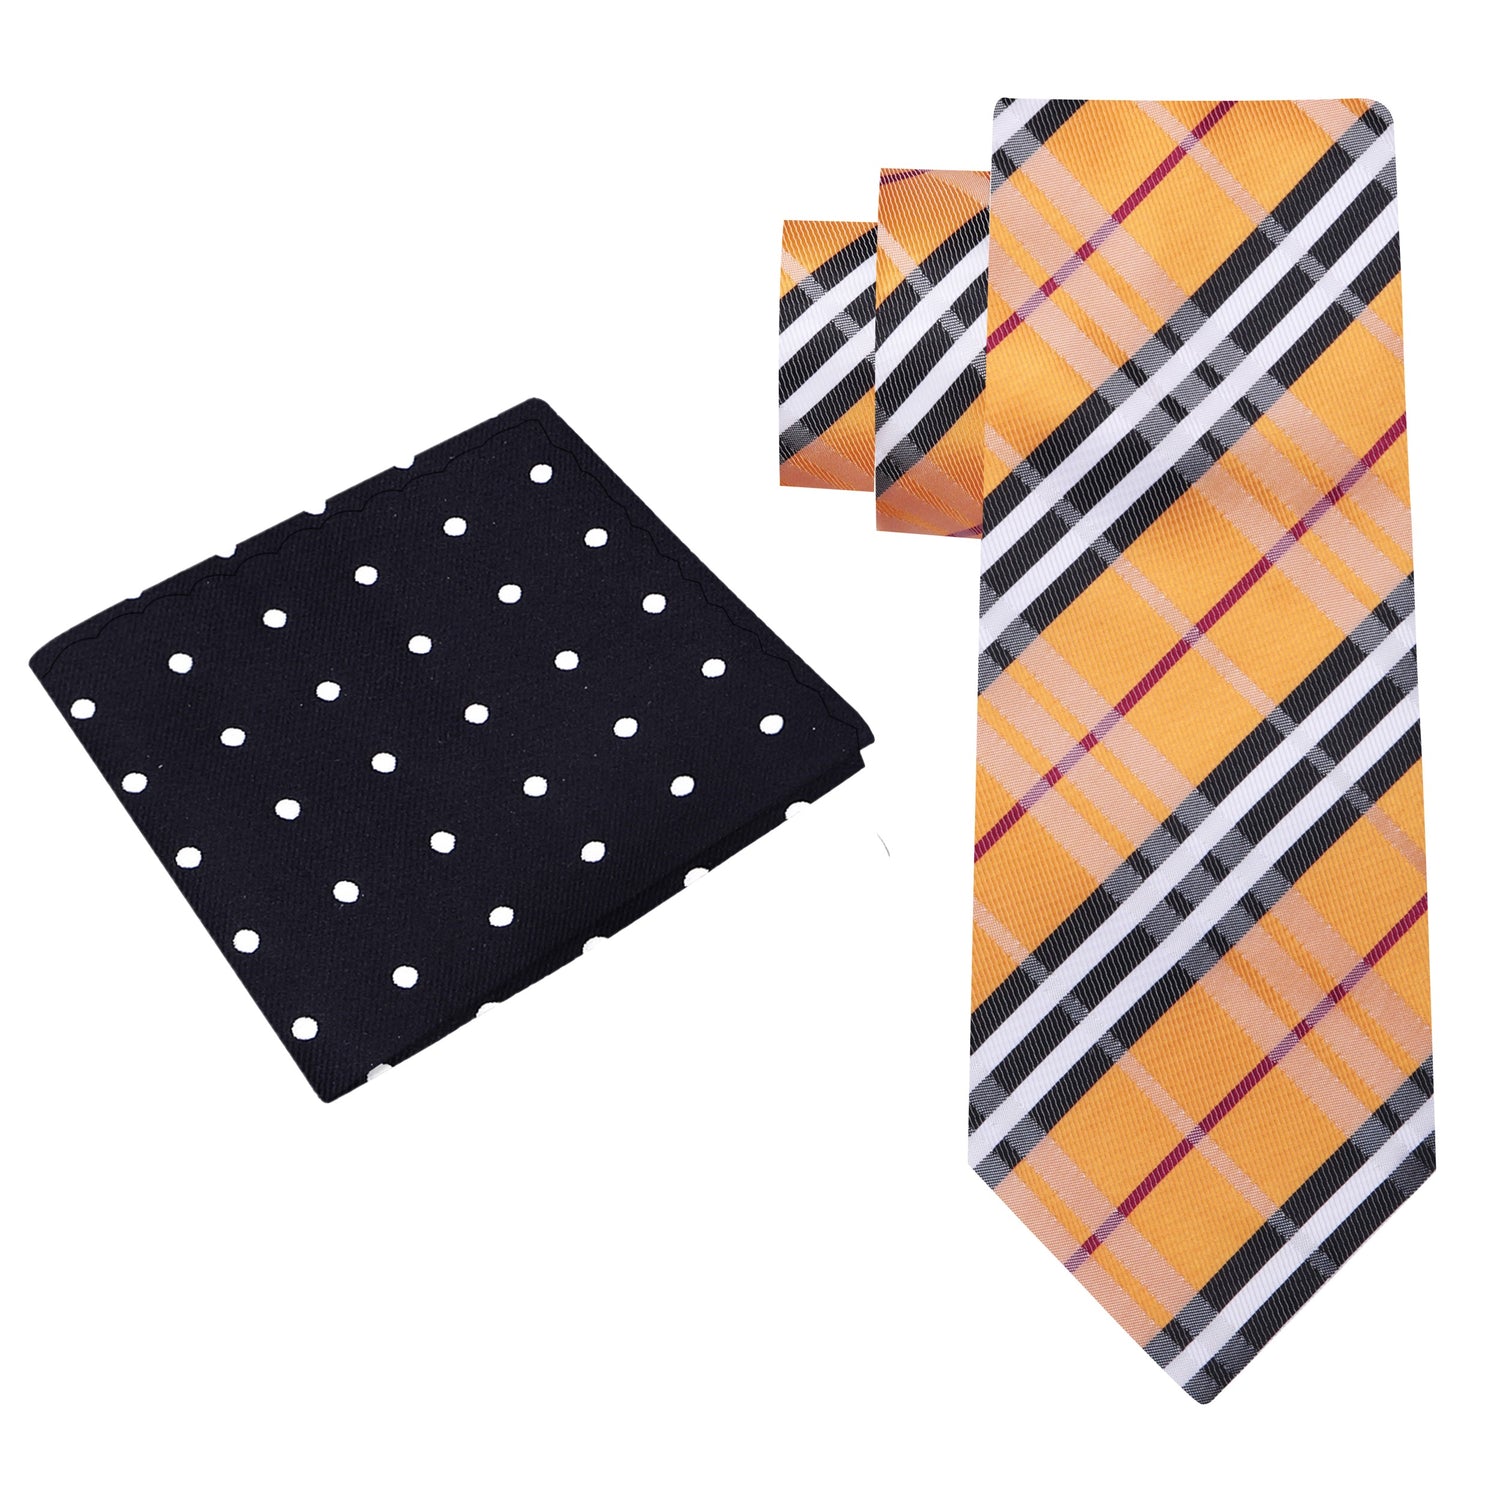 Alt View: Golden Brown, Black, White, Red Plaid Tie and Black with White Dots Square